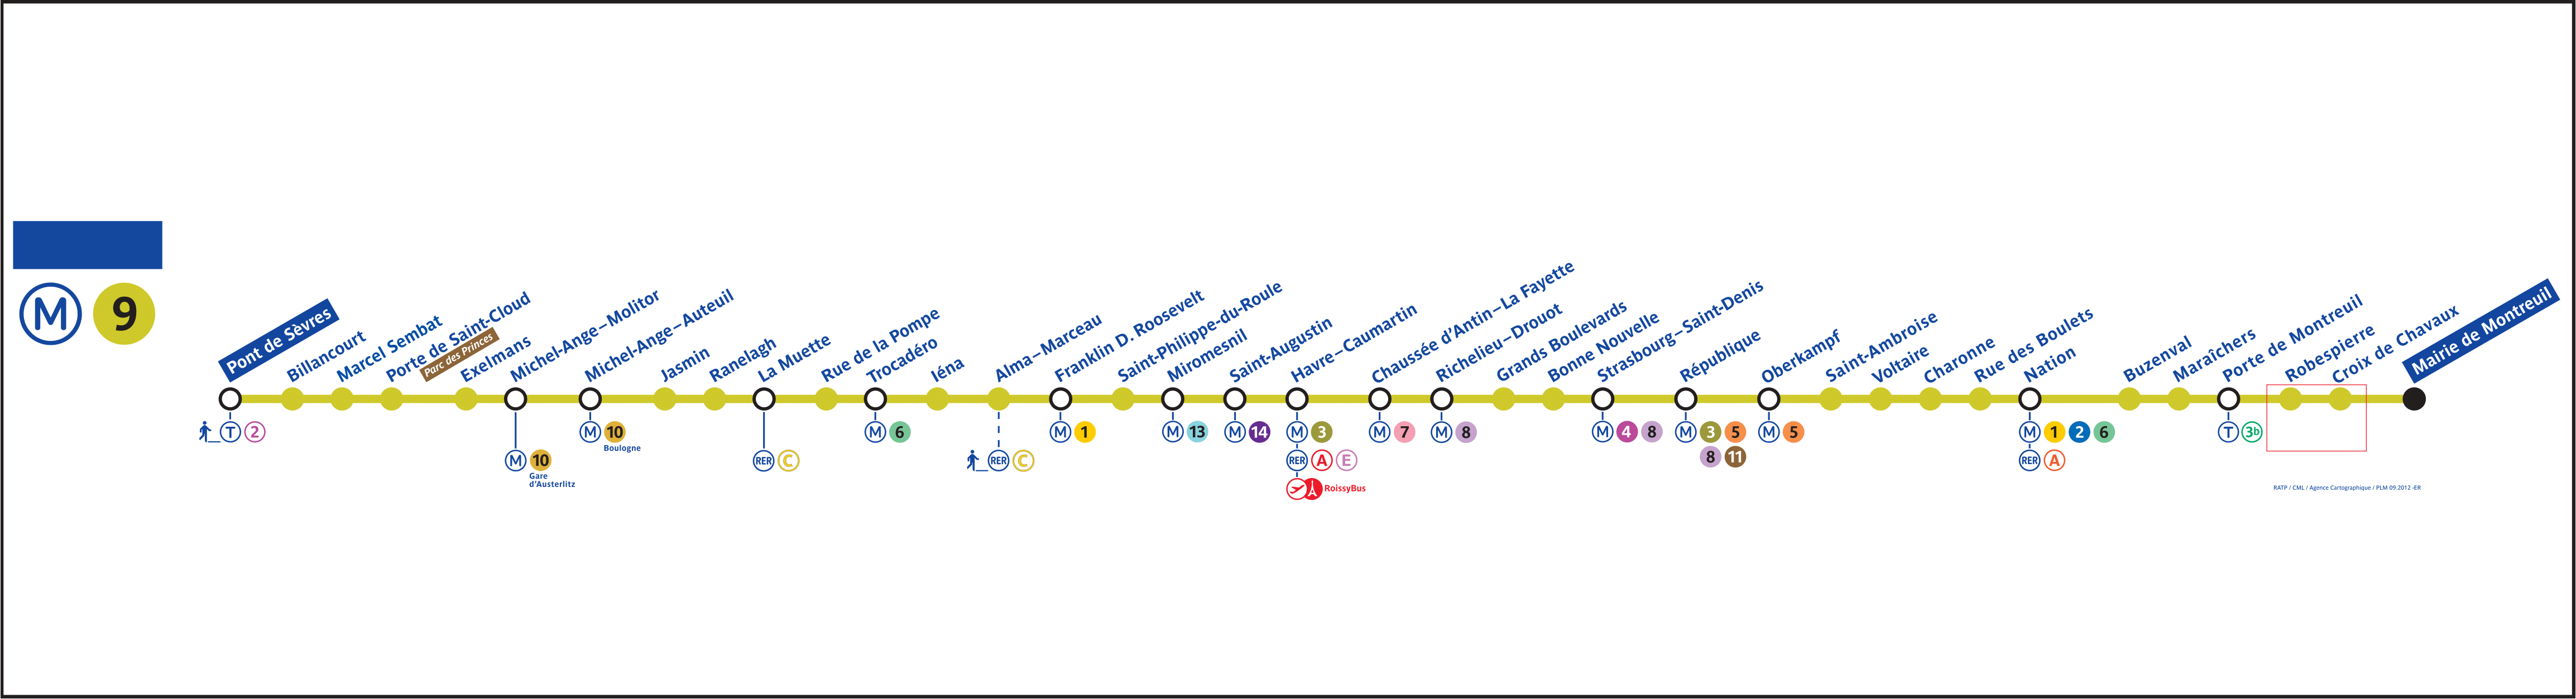 Timetable first and last metro line 9 Paris - Night Fox Tips